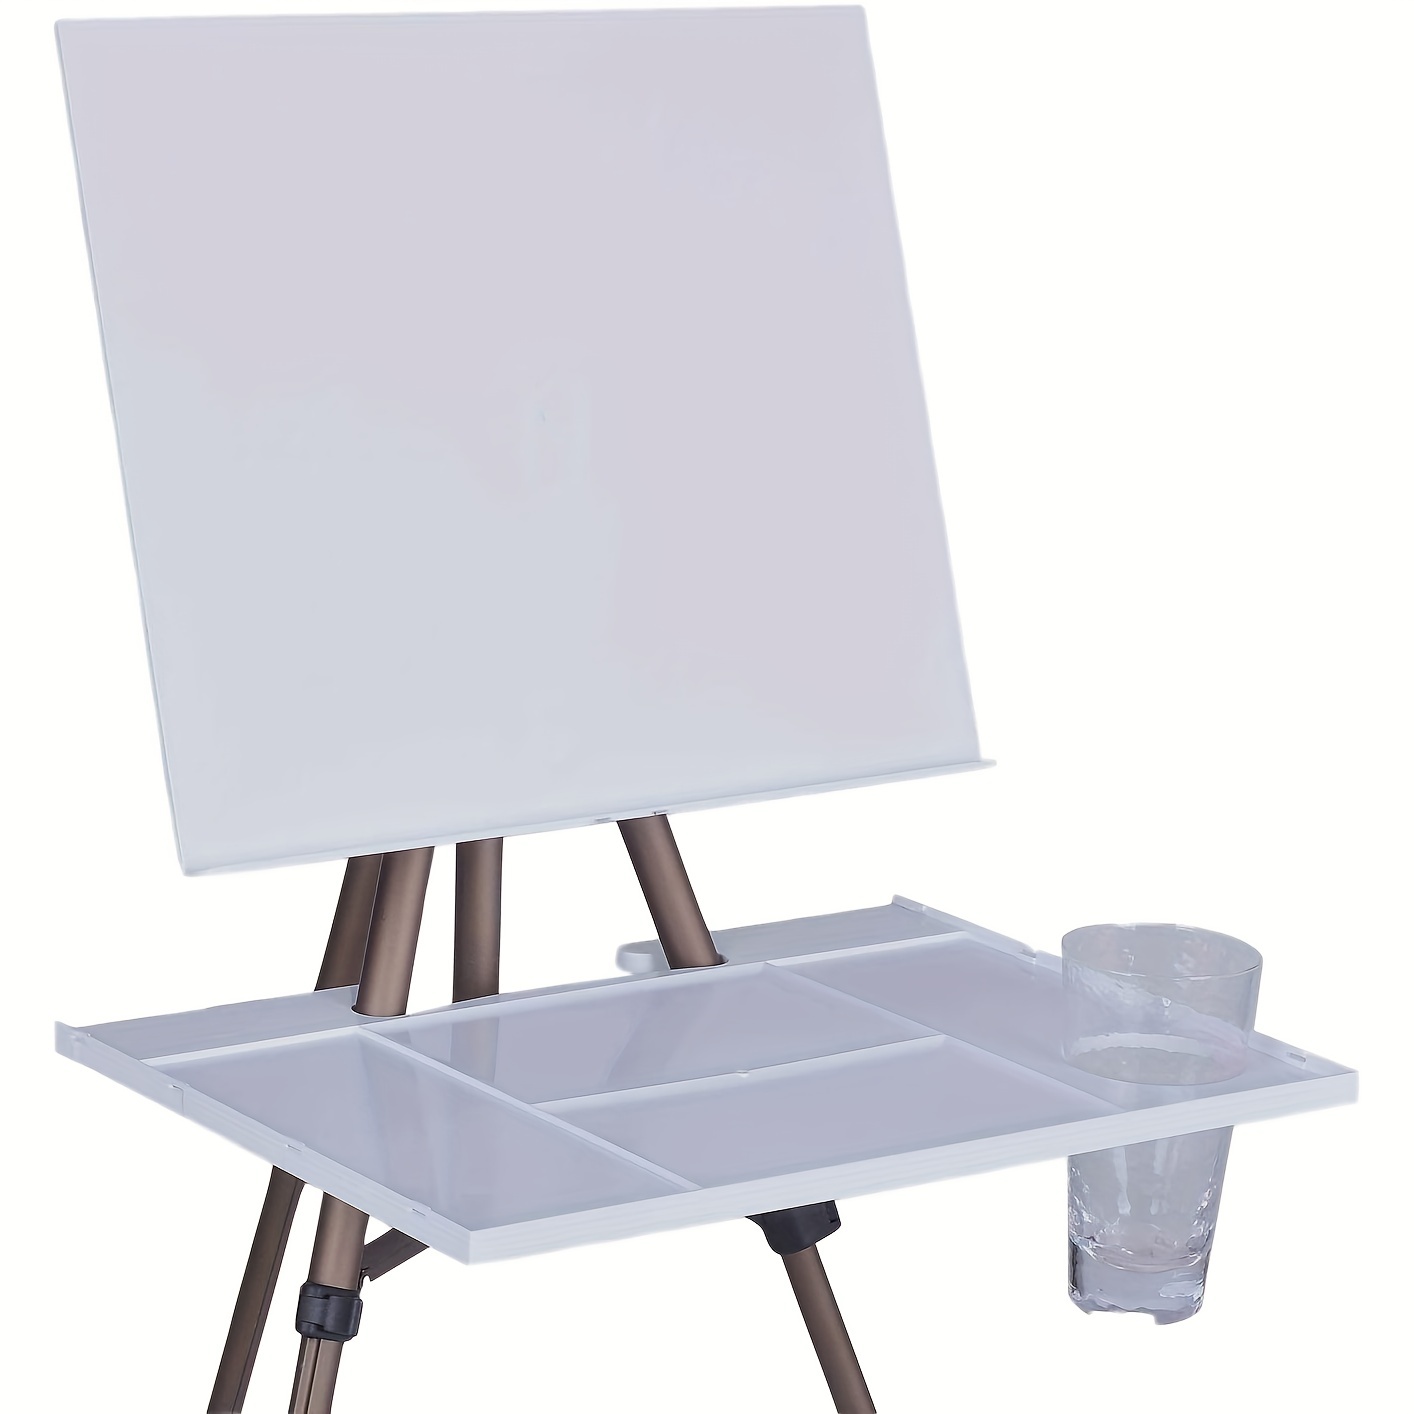 MEEDEN Feild Tripod Easel Stand with Carrying Case